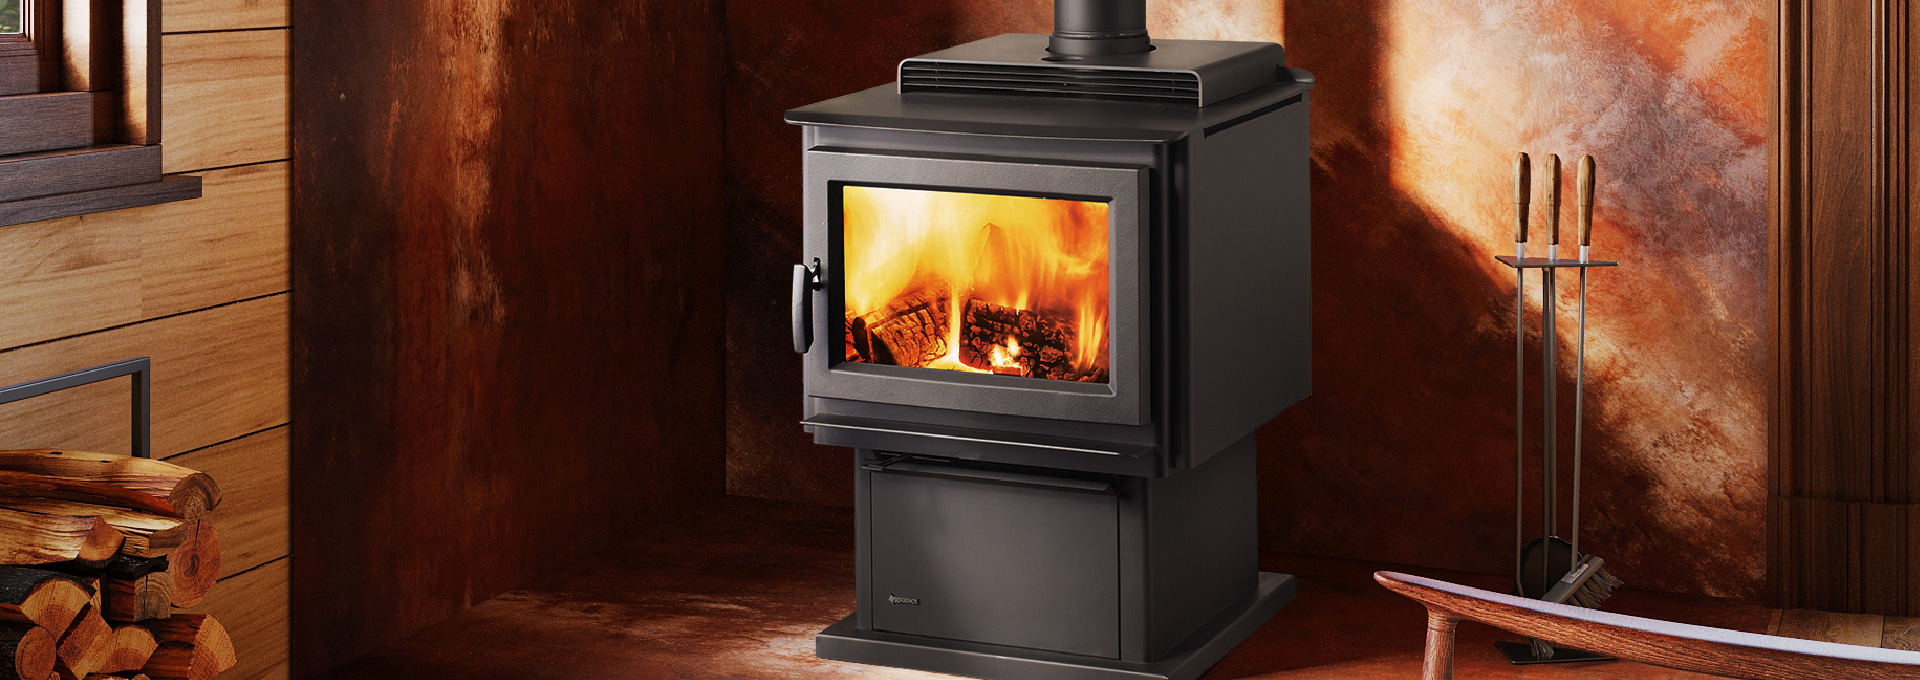 Tips For Using Wood Stove - Heating A Large Home